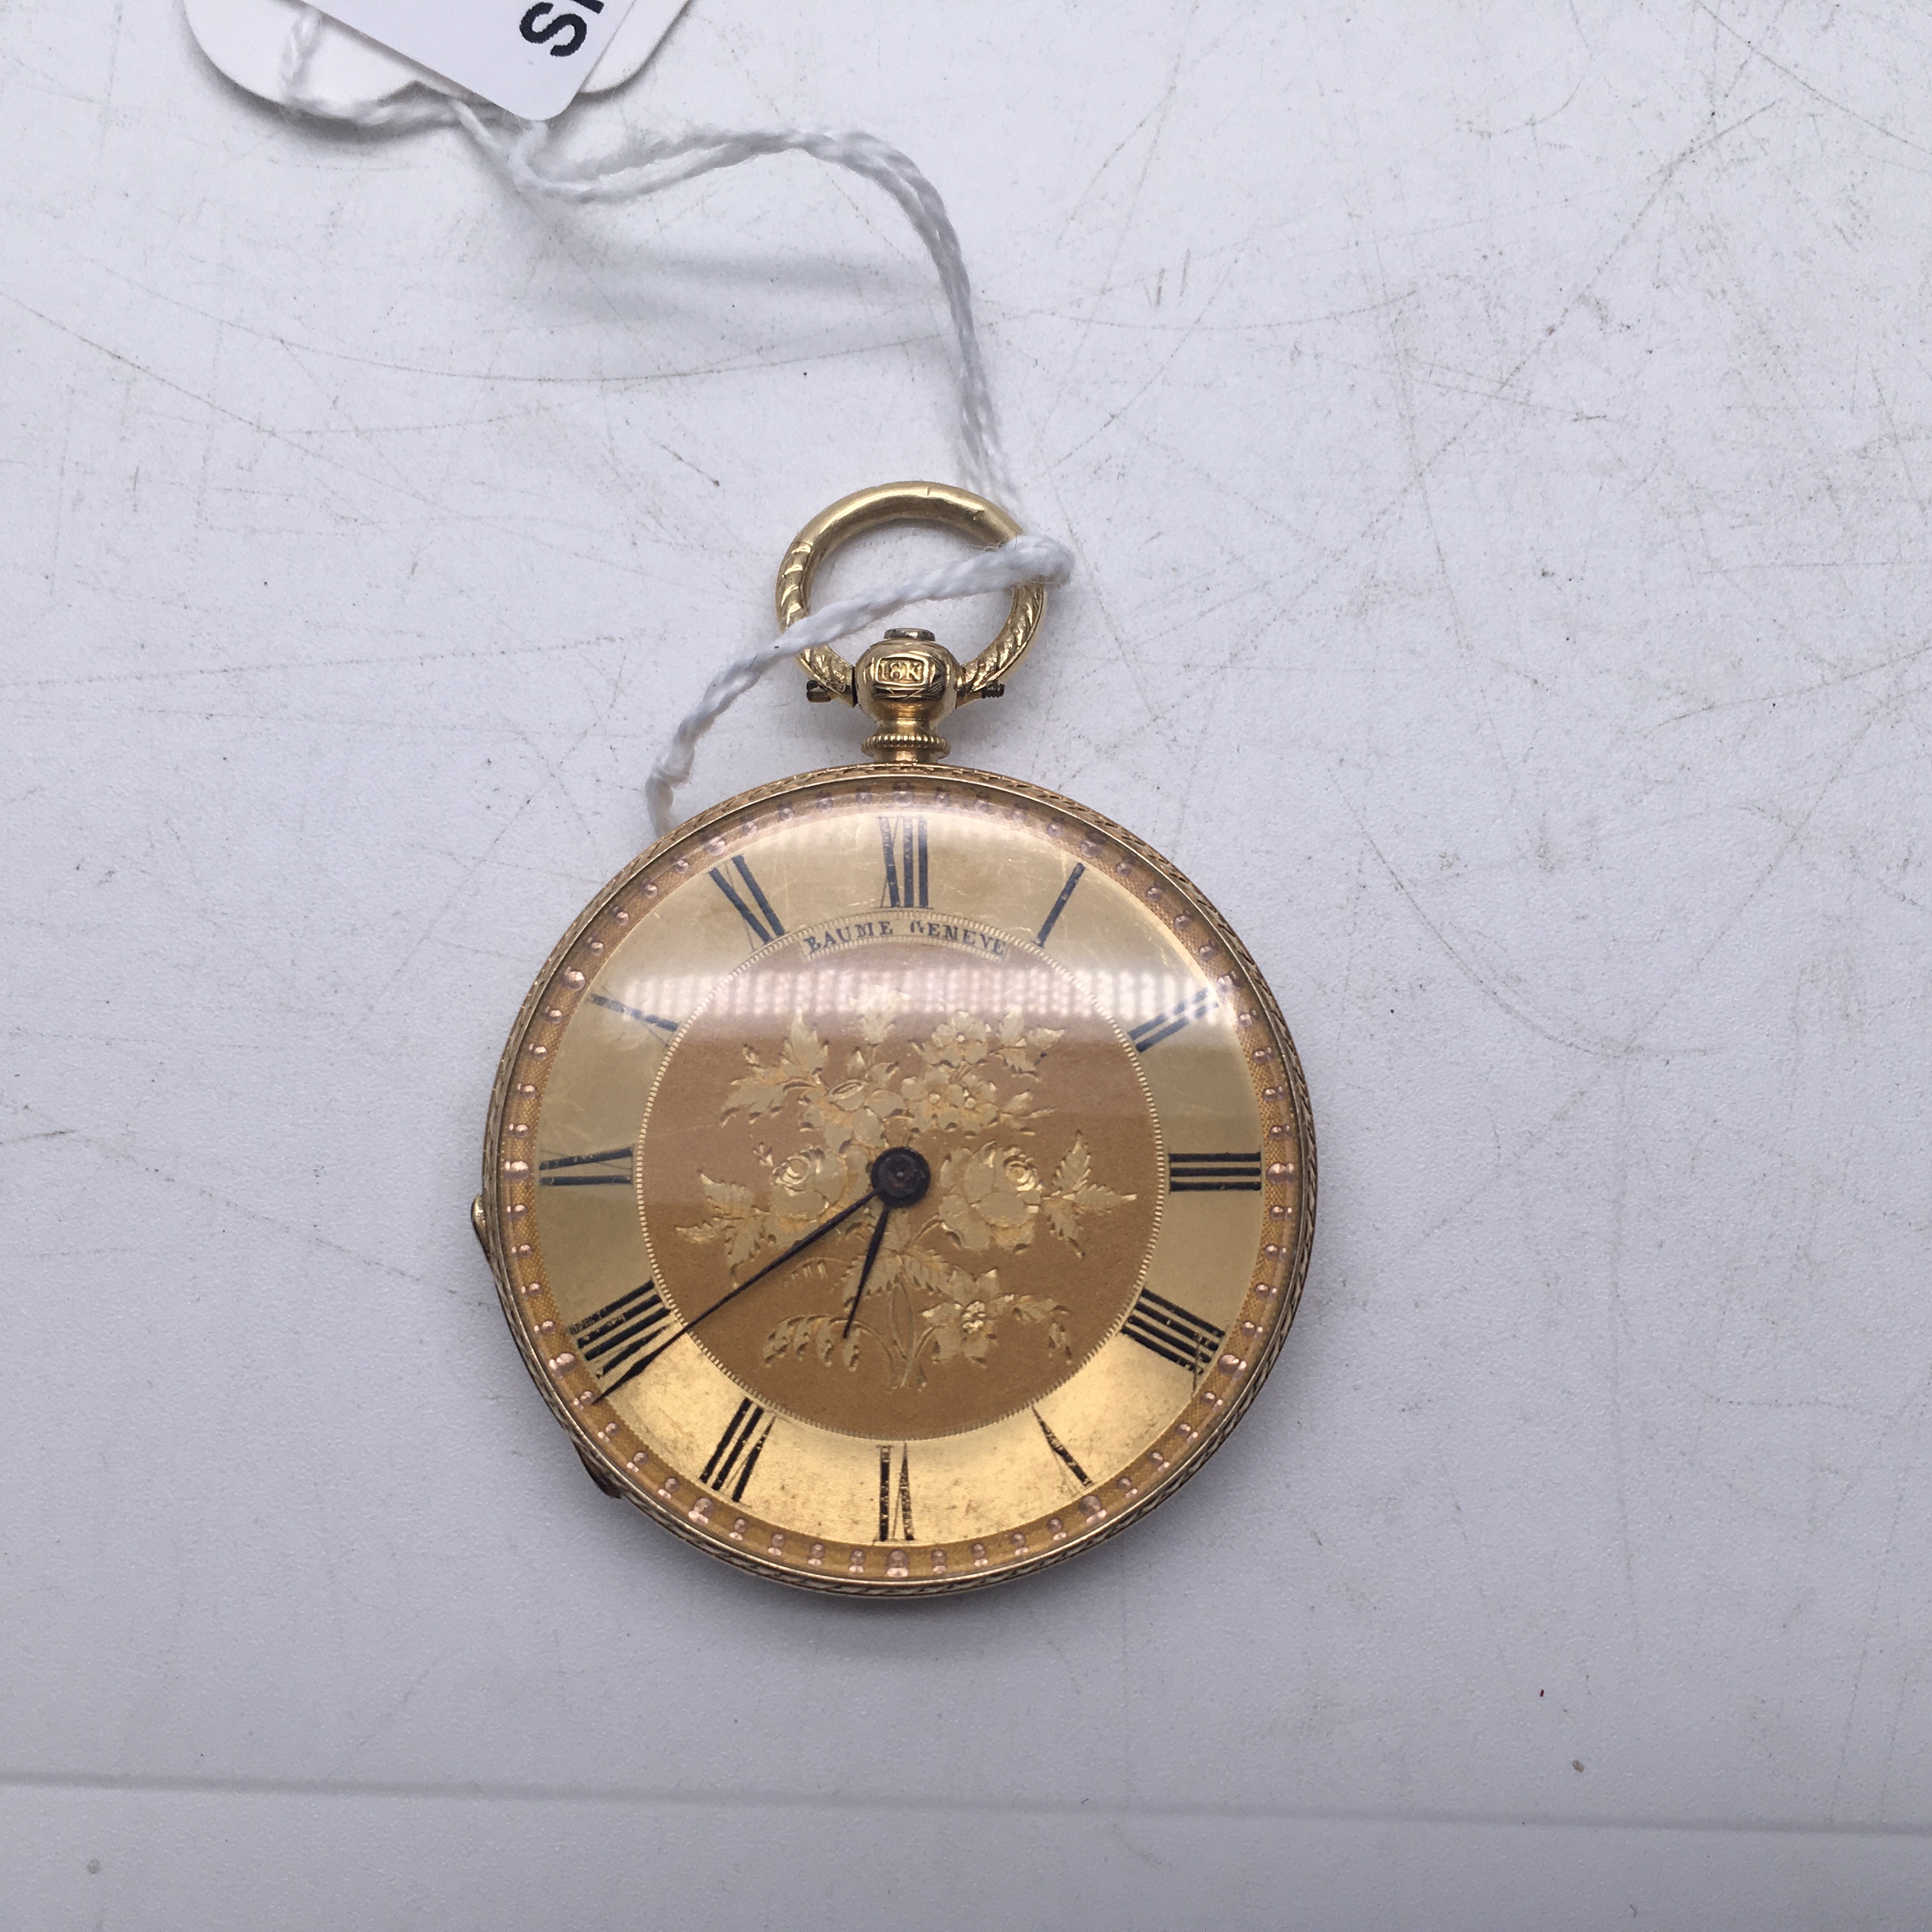 Baume Geneva pocket watch in 18 carat gold with mechanical movement the bessel has floral decoration - Image 3 of 3